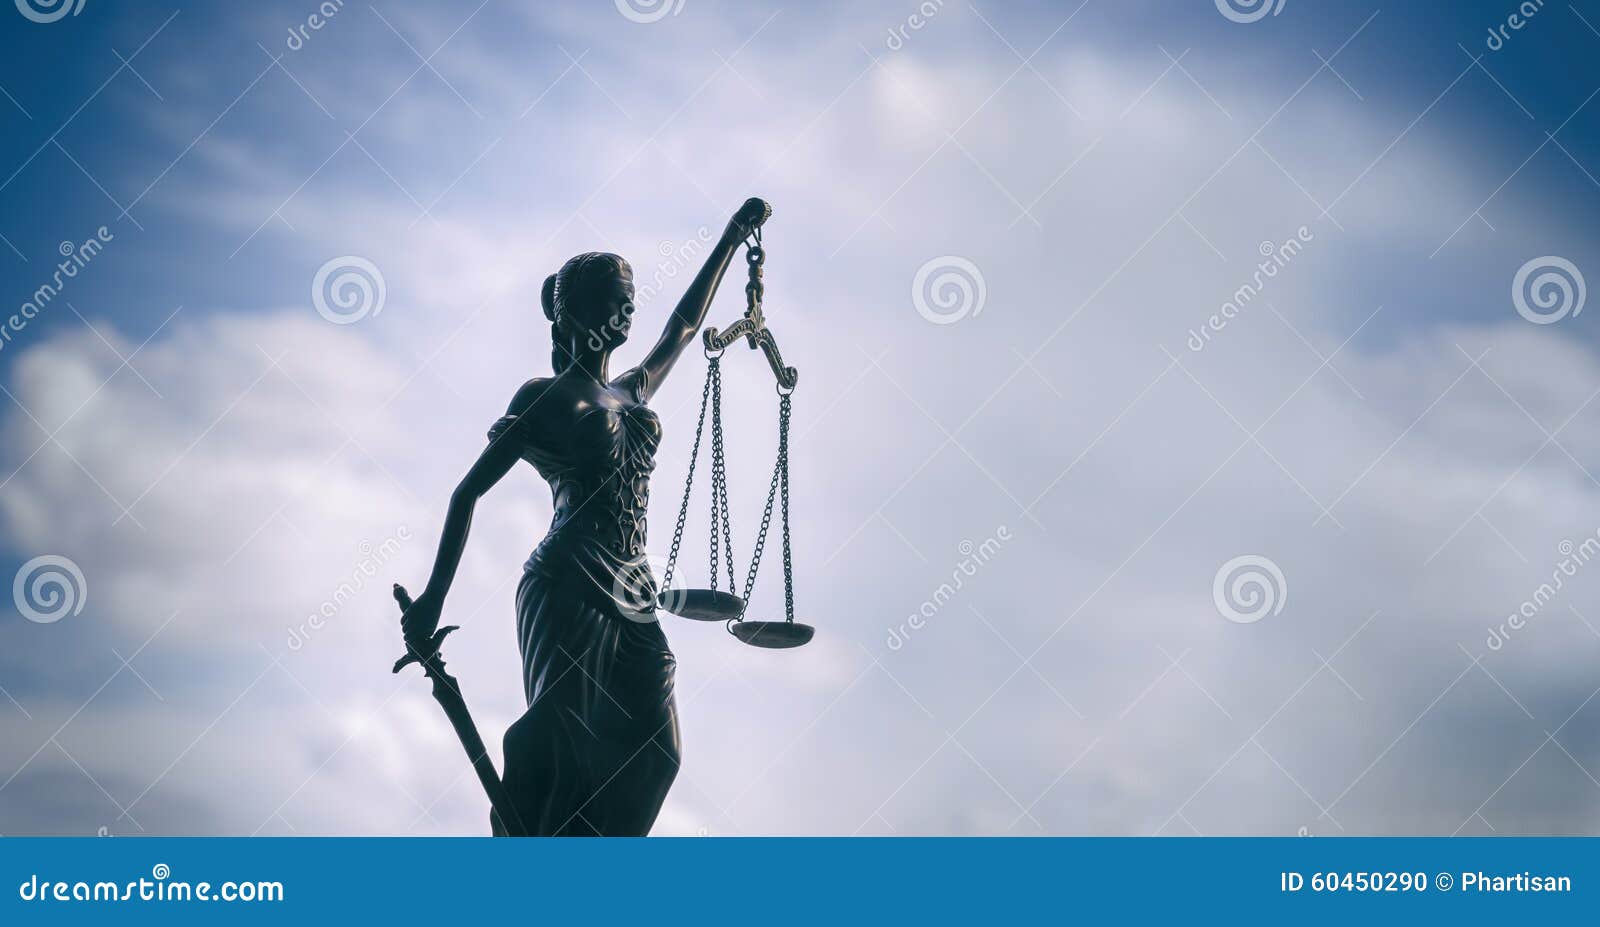 scales of justice background - legal law concept